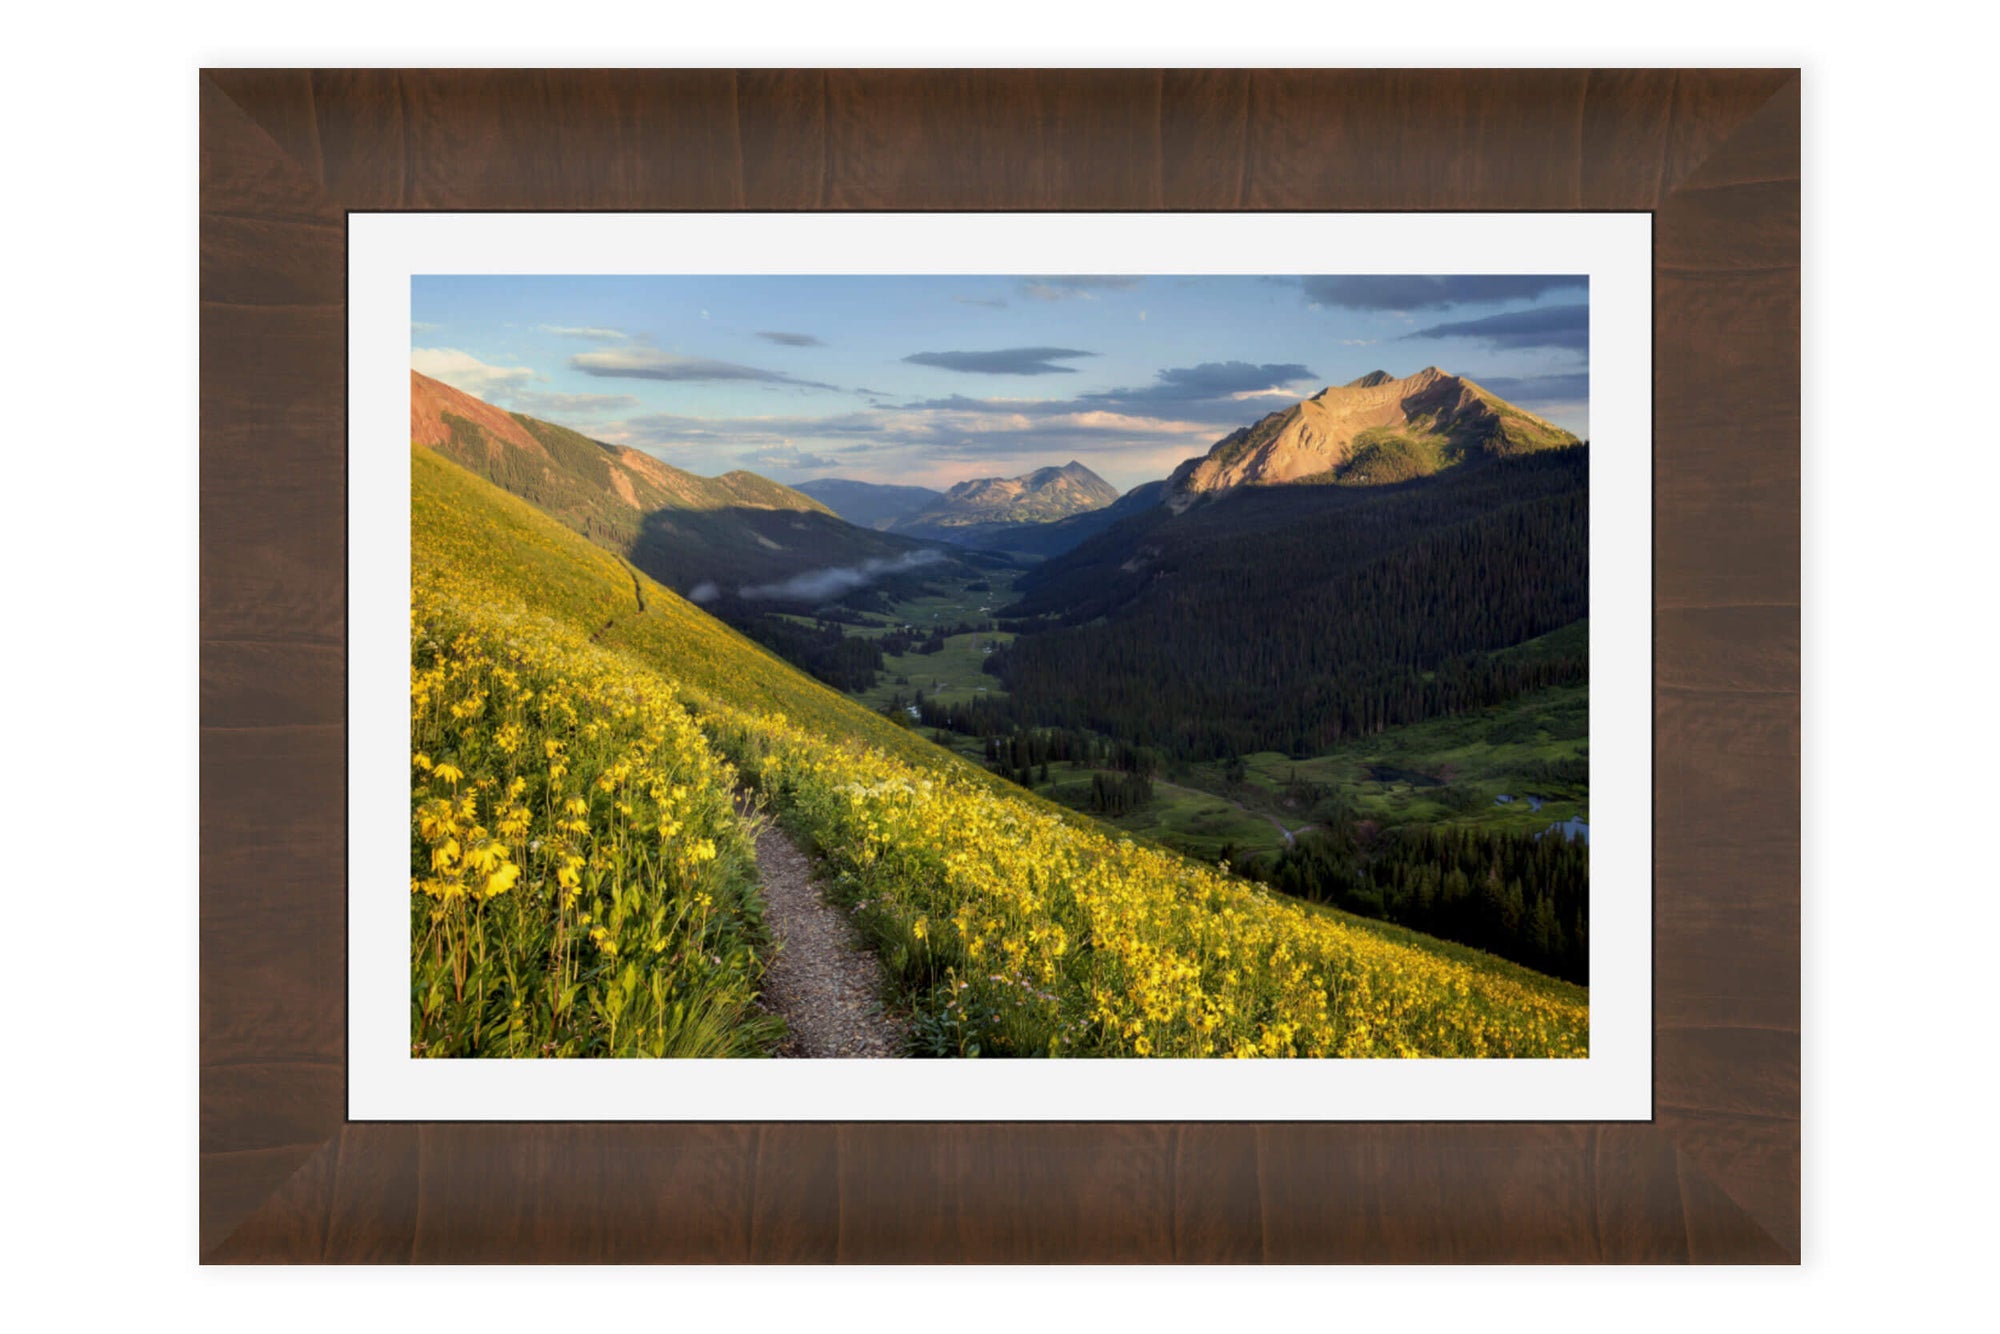 A framed Crested Butte wildflower picture from a popular hiking trail.